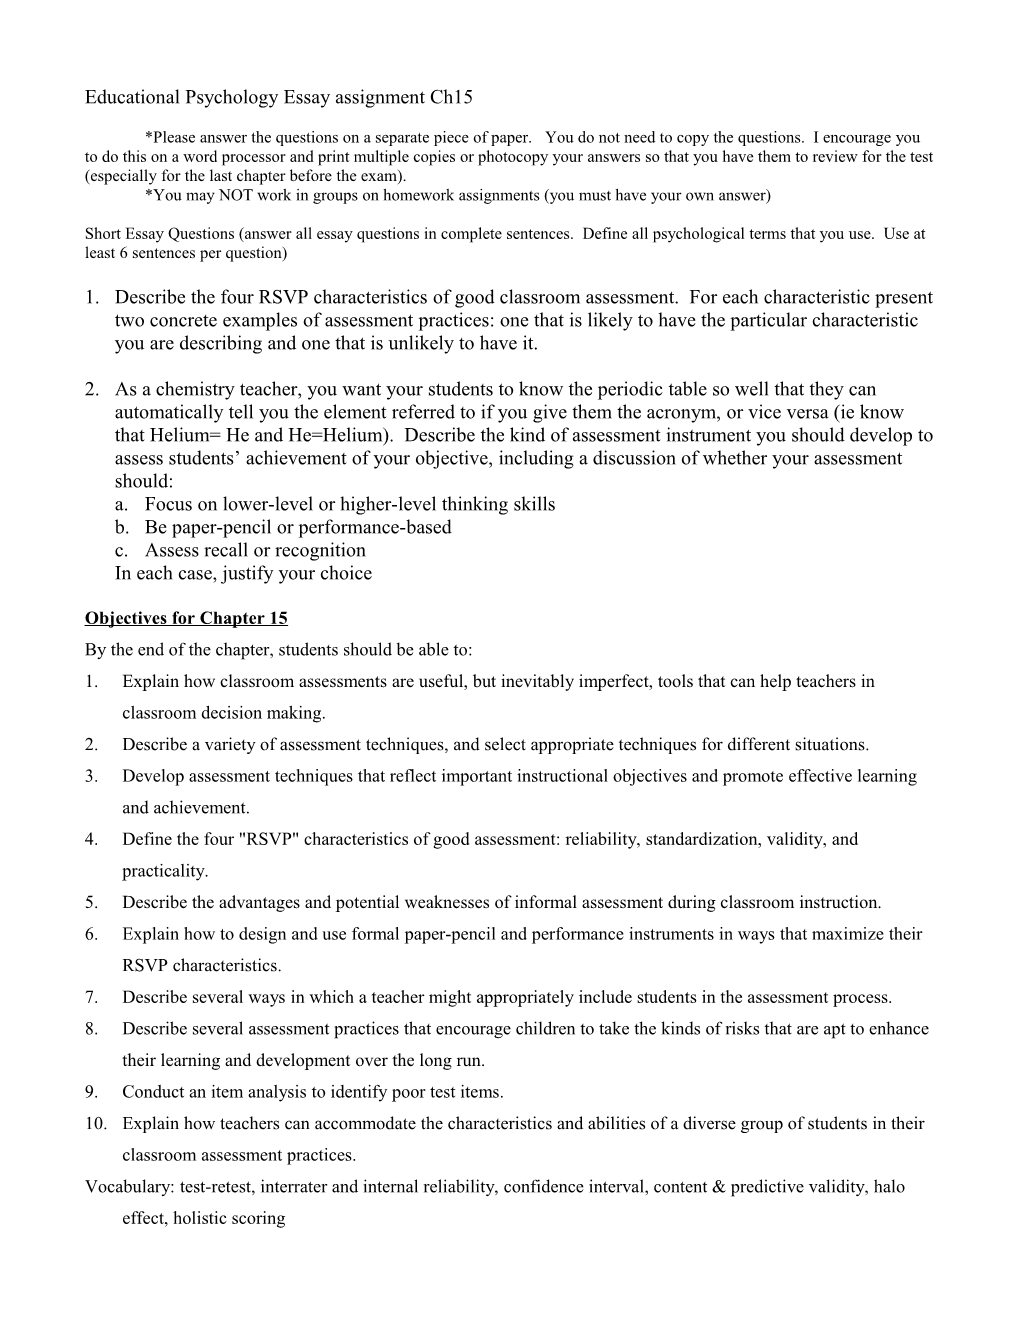 Educational Psychology Essay Assignment Ch1